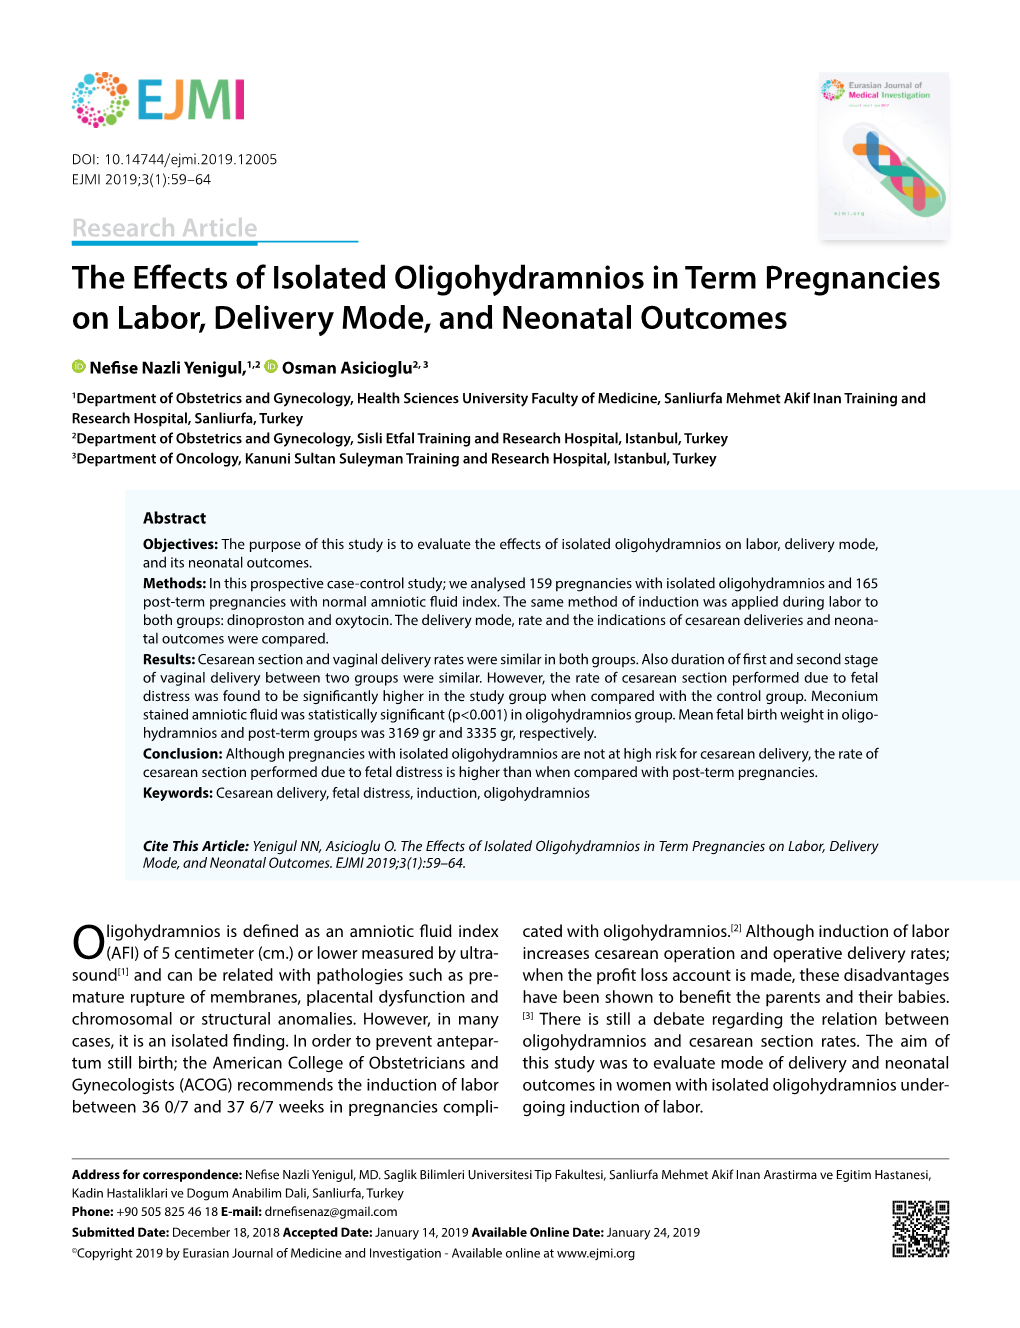 The Effects of Isolated Oligohydramnios in Term Pregnancies on Labor, Delivery Mode, and Neonatal Outcomes